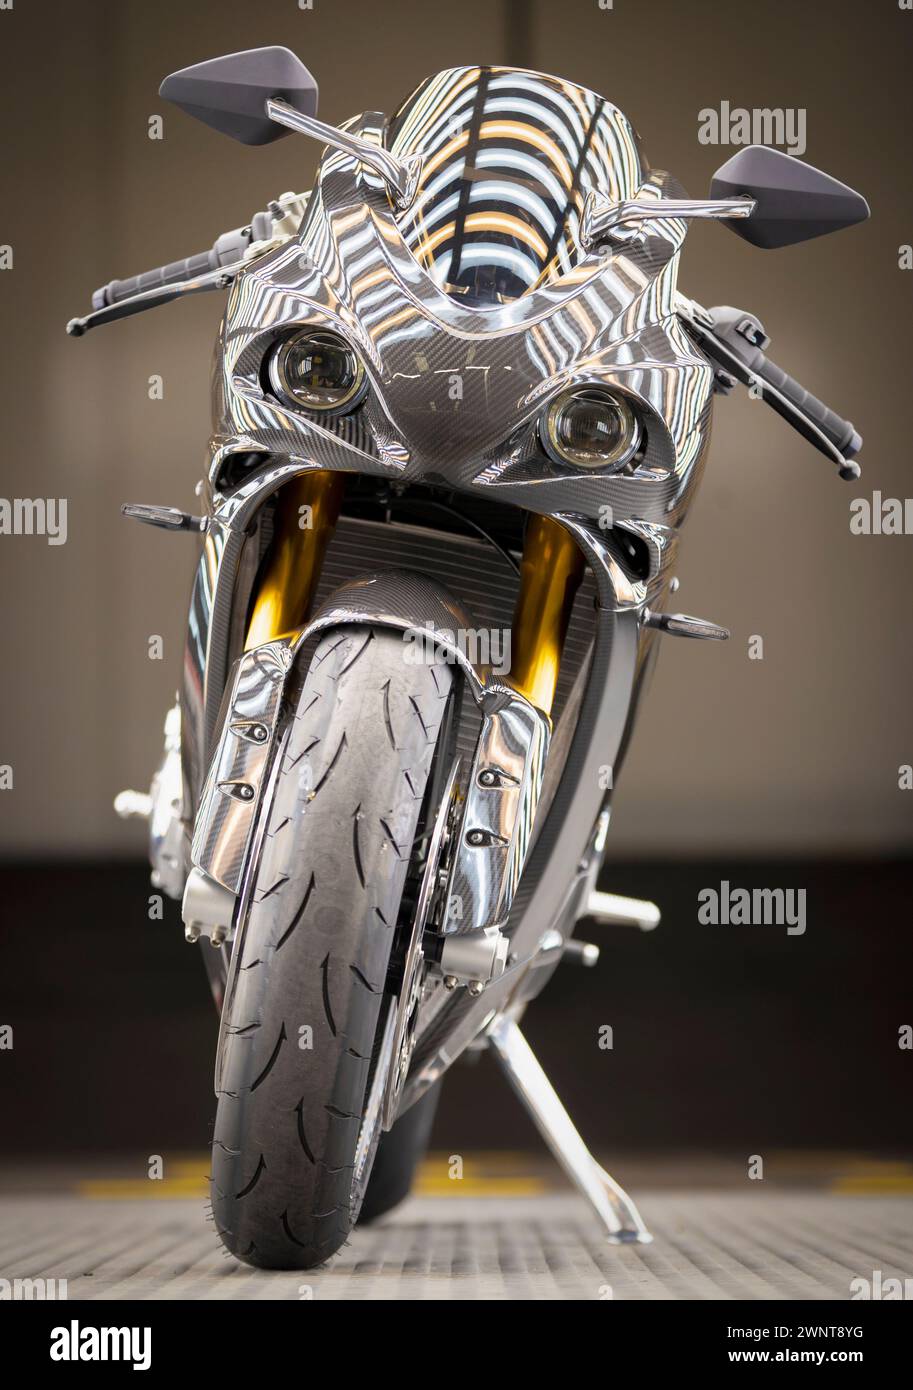 Norton Motorcycles, now owned by TVS Motor Company, opens new factory in Birmingham two years after previous company went into liquidation. Stock Photo